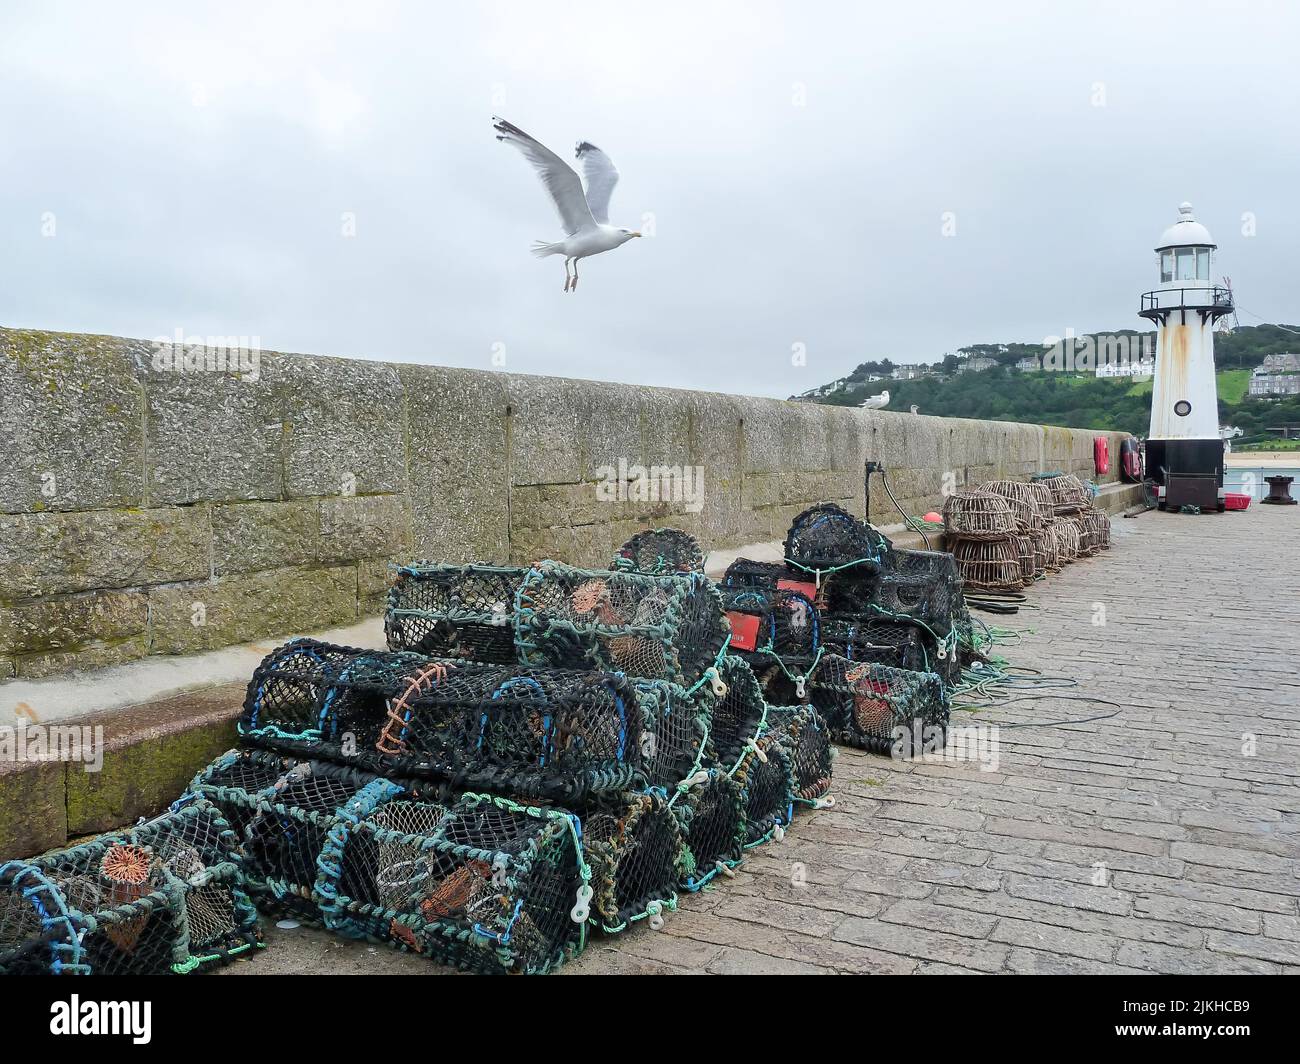 A seagull flying over a pile of lobster traps Stock Photo